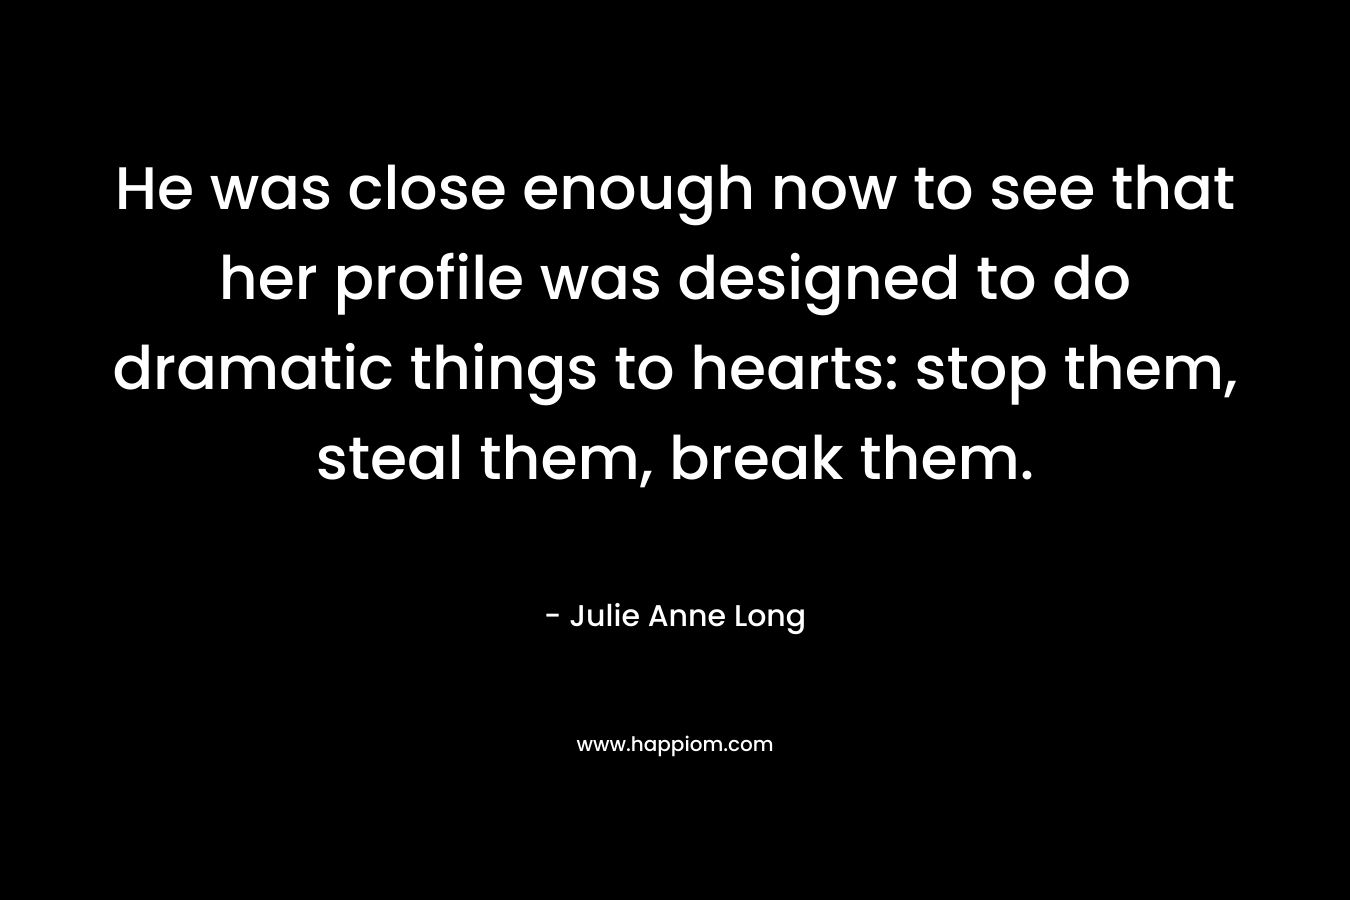 He was close enough now to see that her profile was designed to do dramatic things to hearts: stop them, steal them, break them. – Julie Anne Long